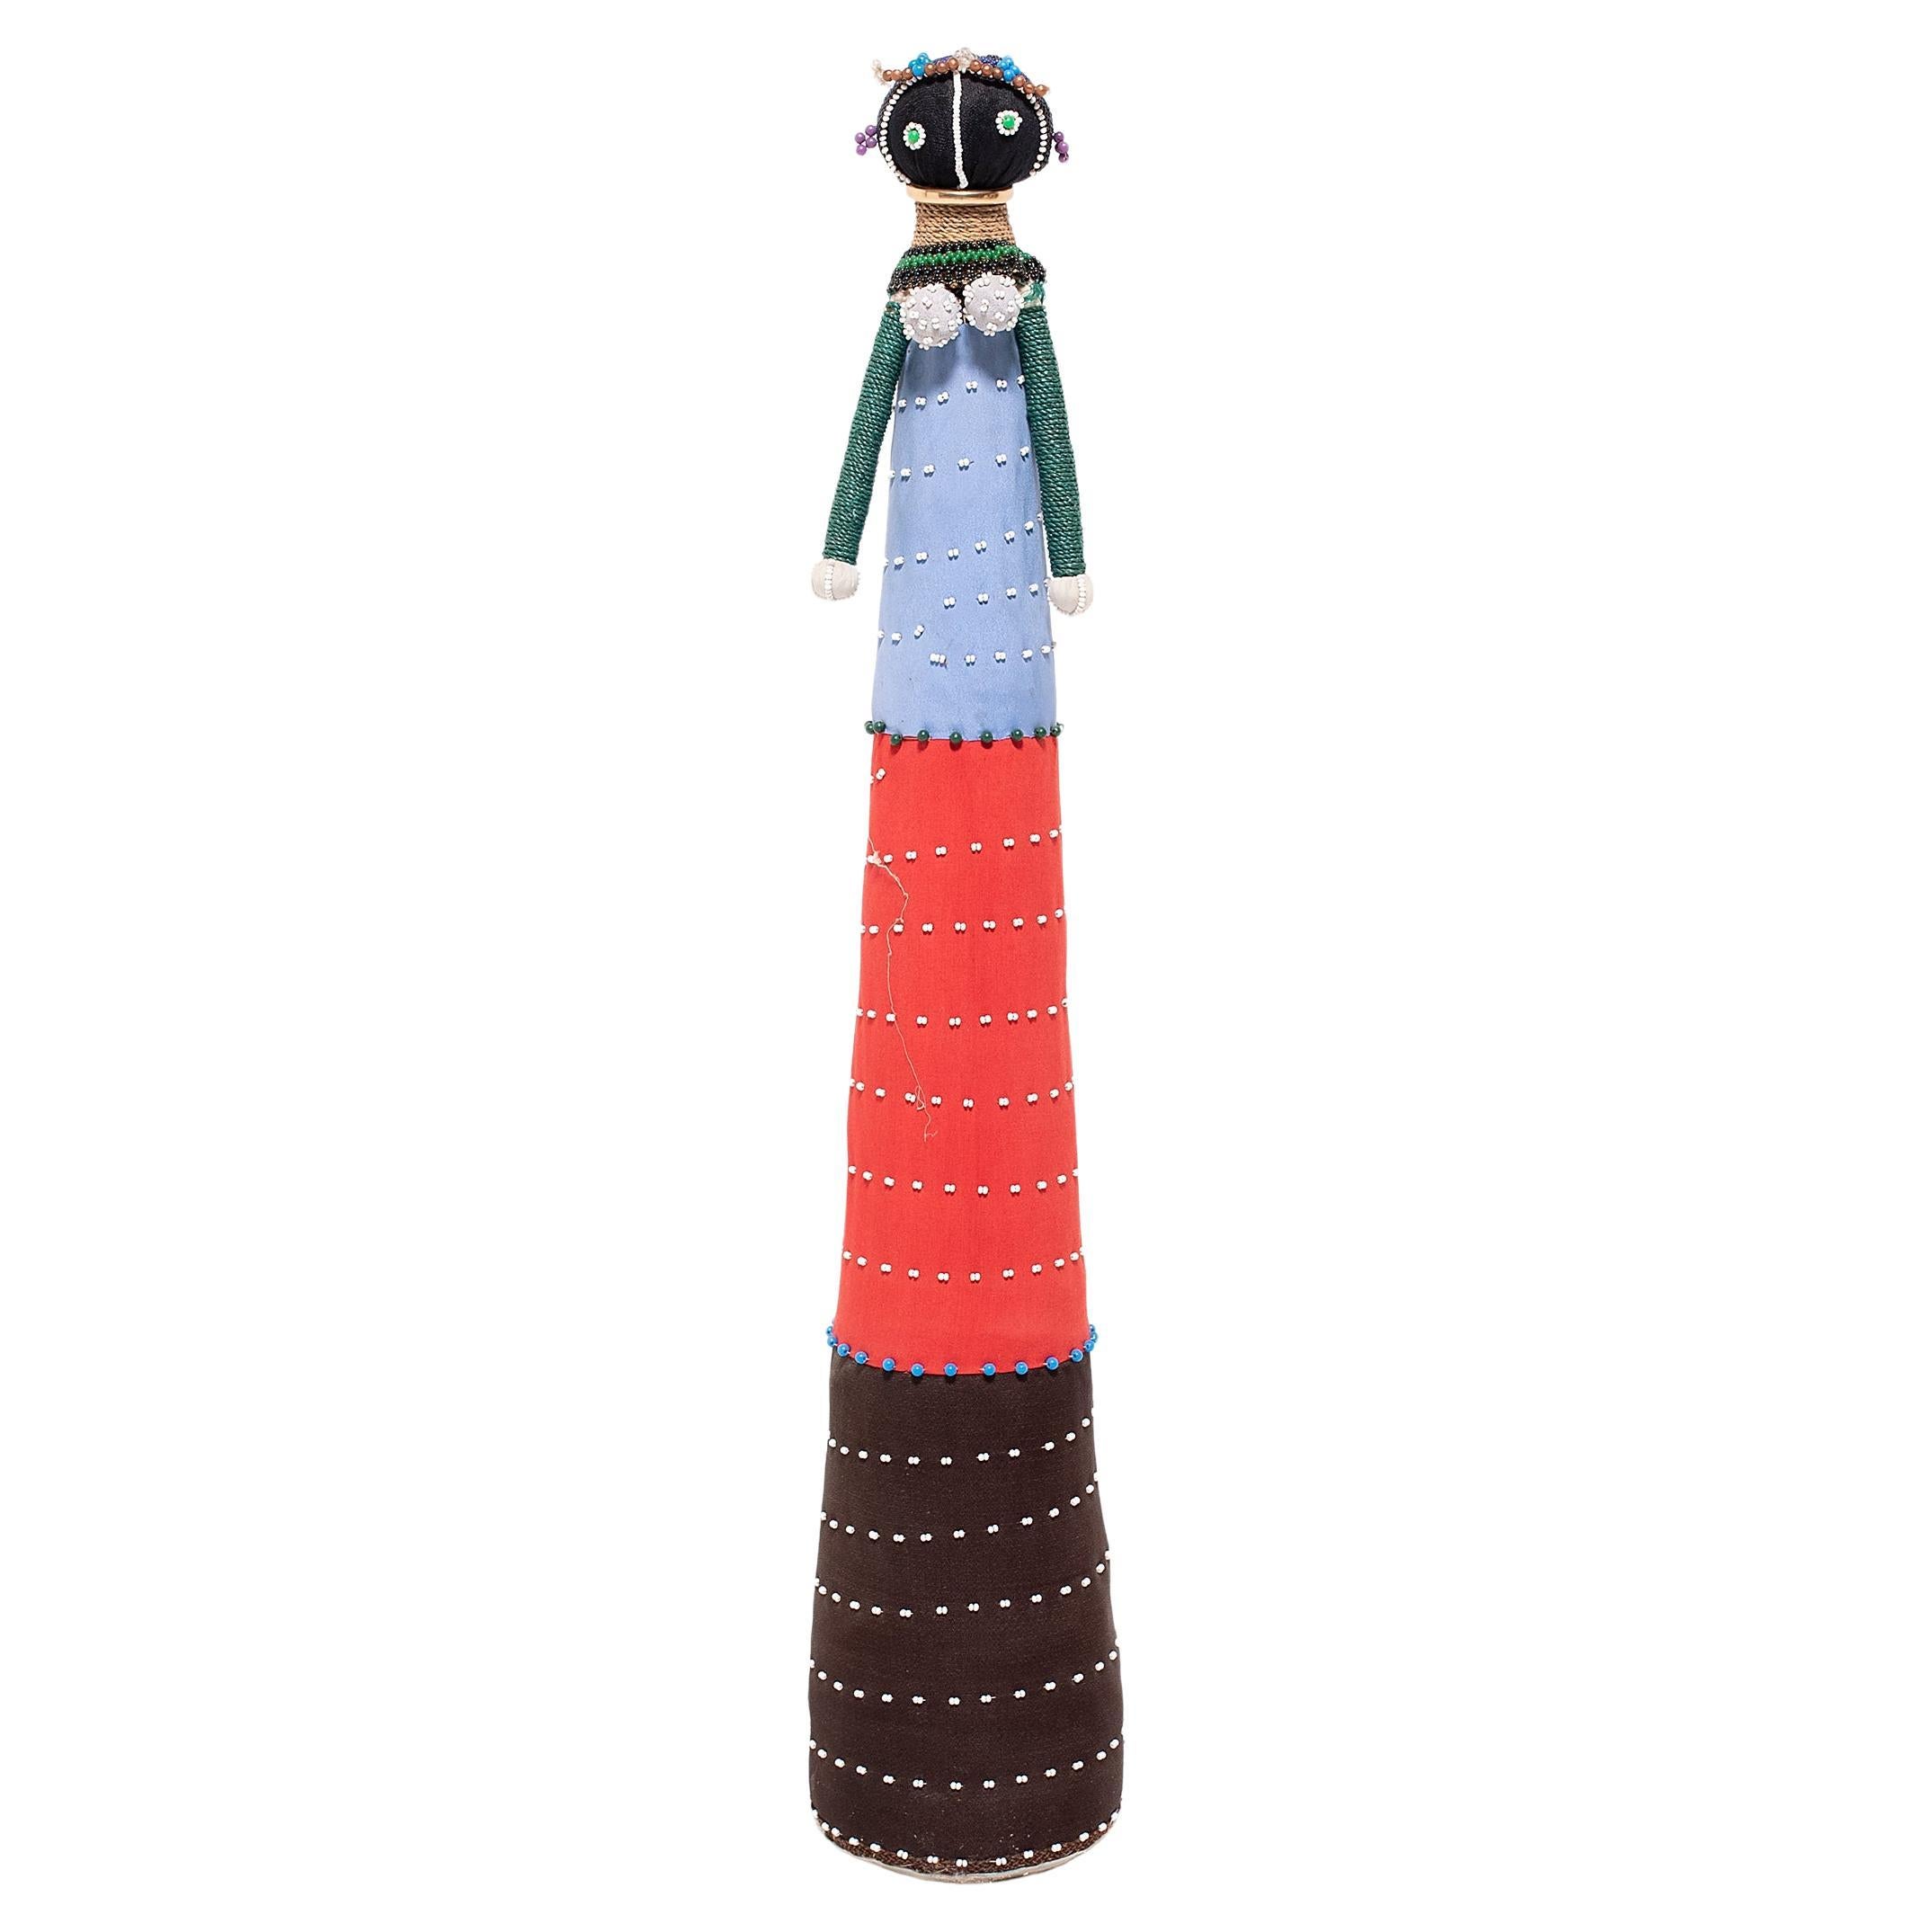 Beaded Ndebele Ceremonial Doll For Sale